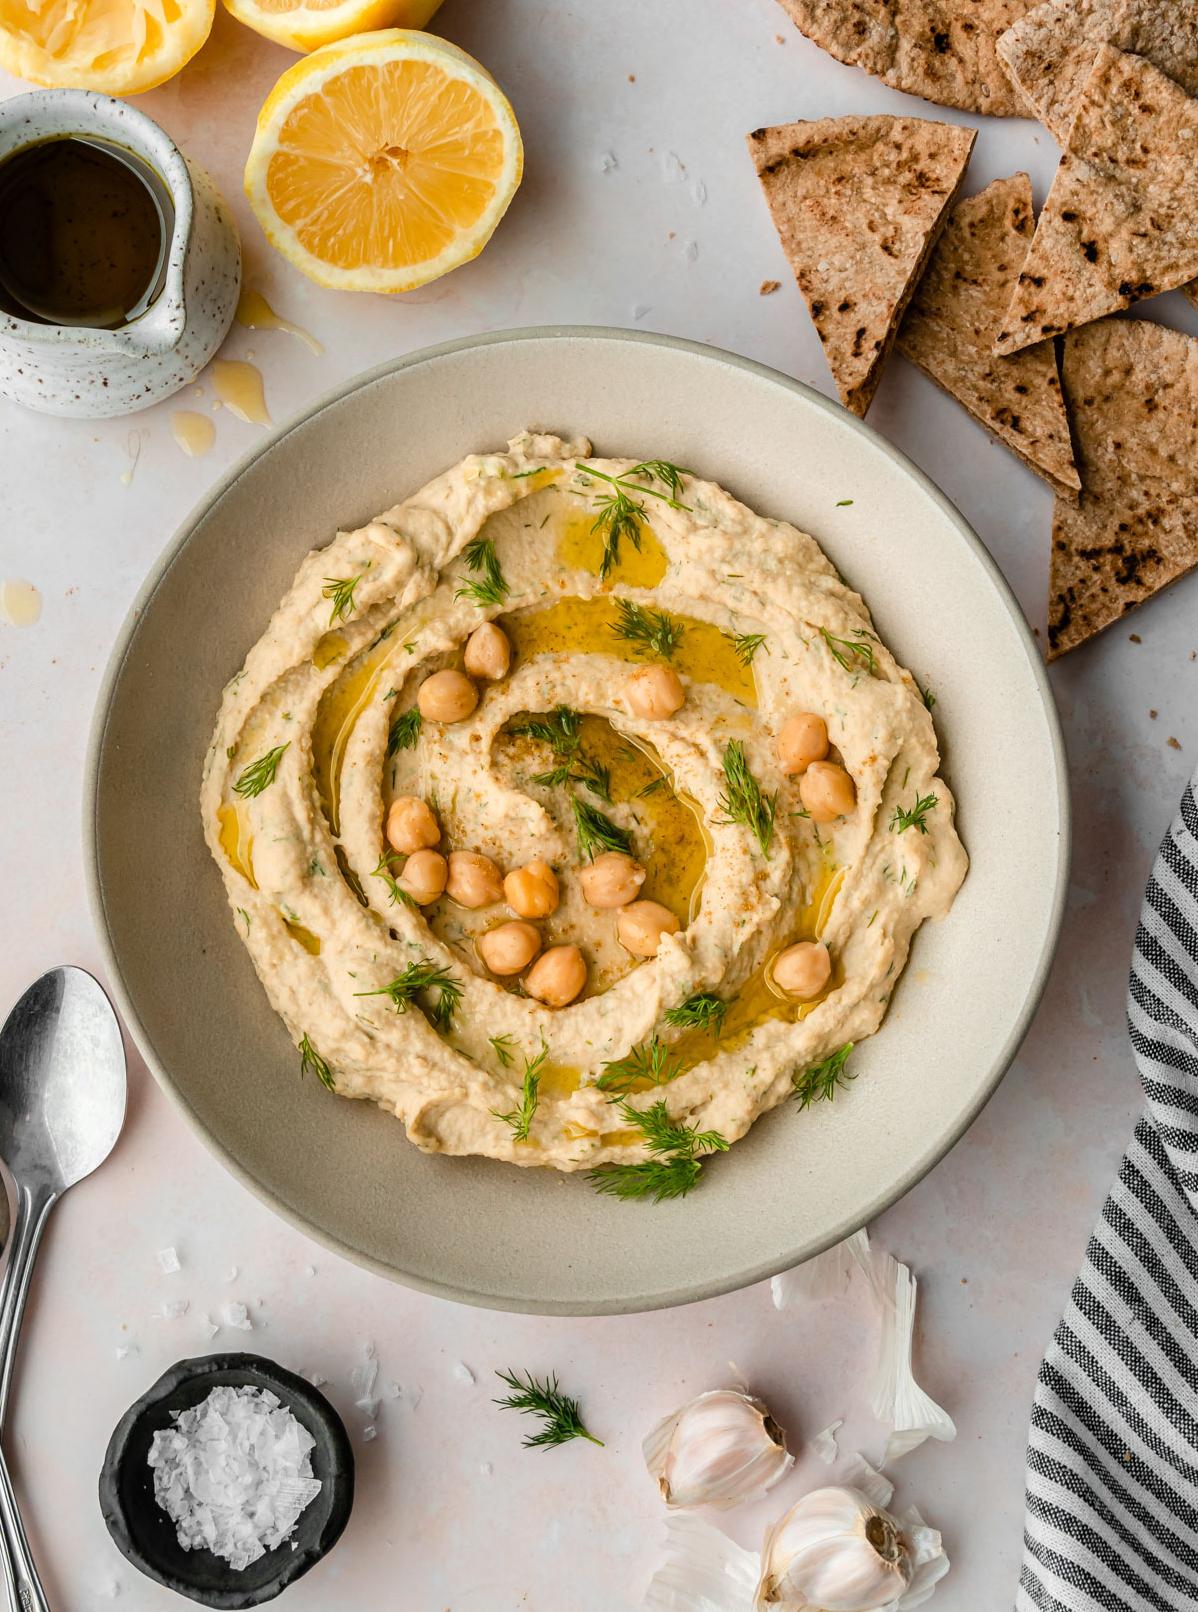  Pair this hummus with your favorite veggies for a perfect snack.